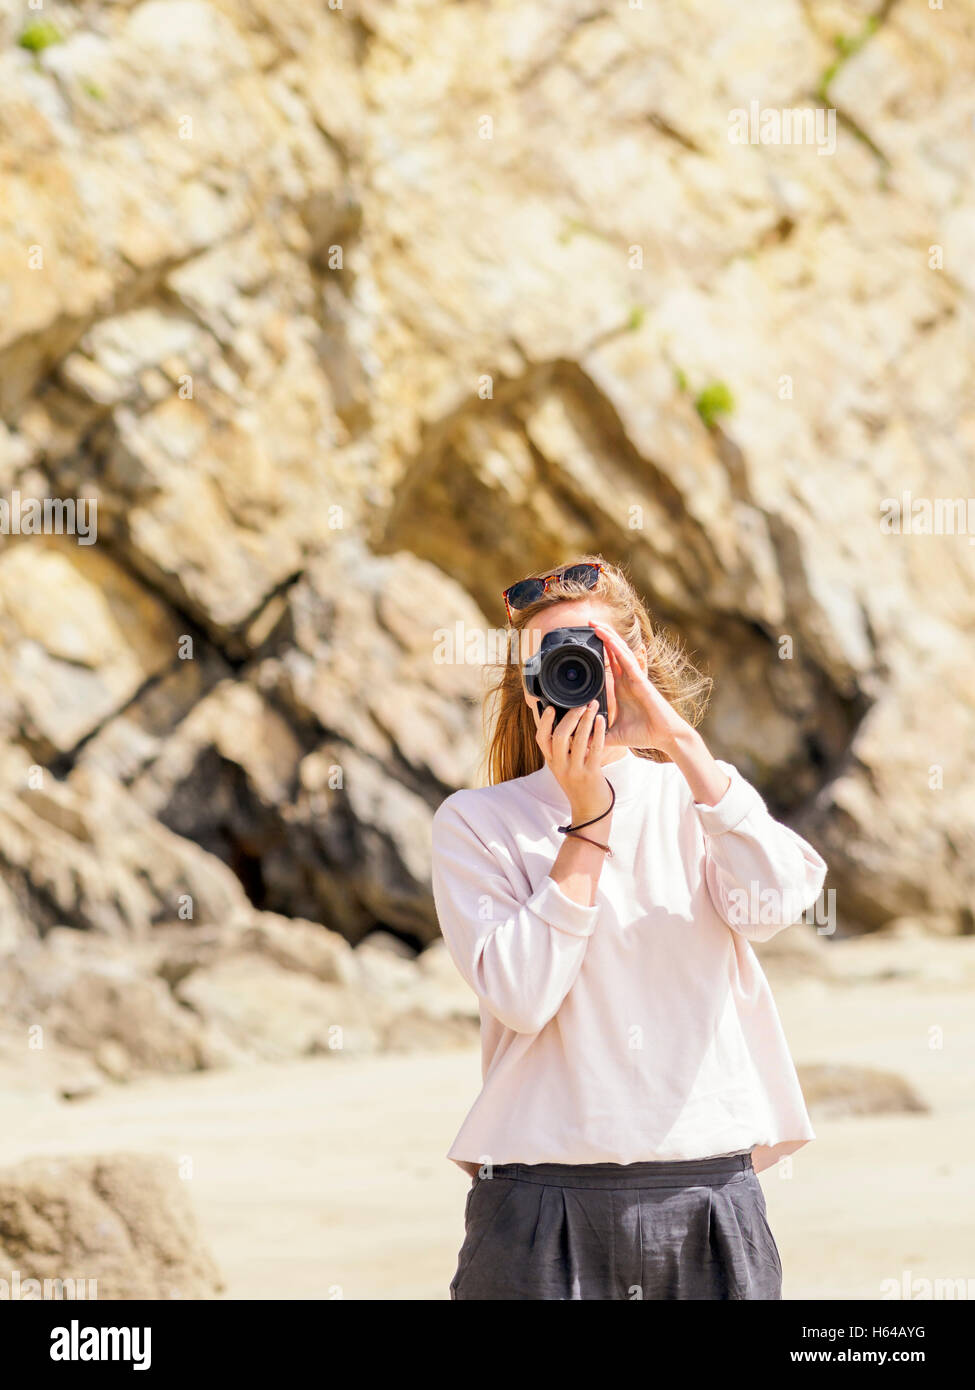 Woman standing at the beach, taking a picture with camera Stock Photo